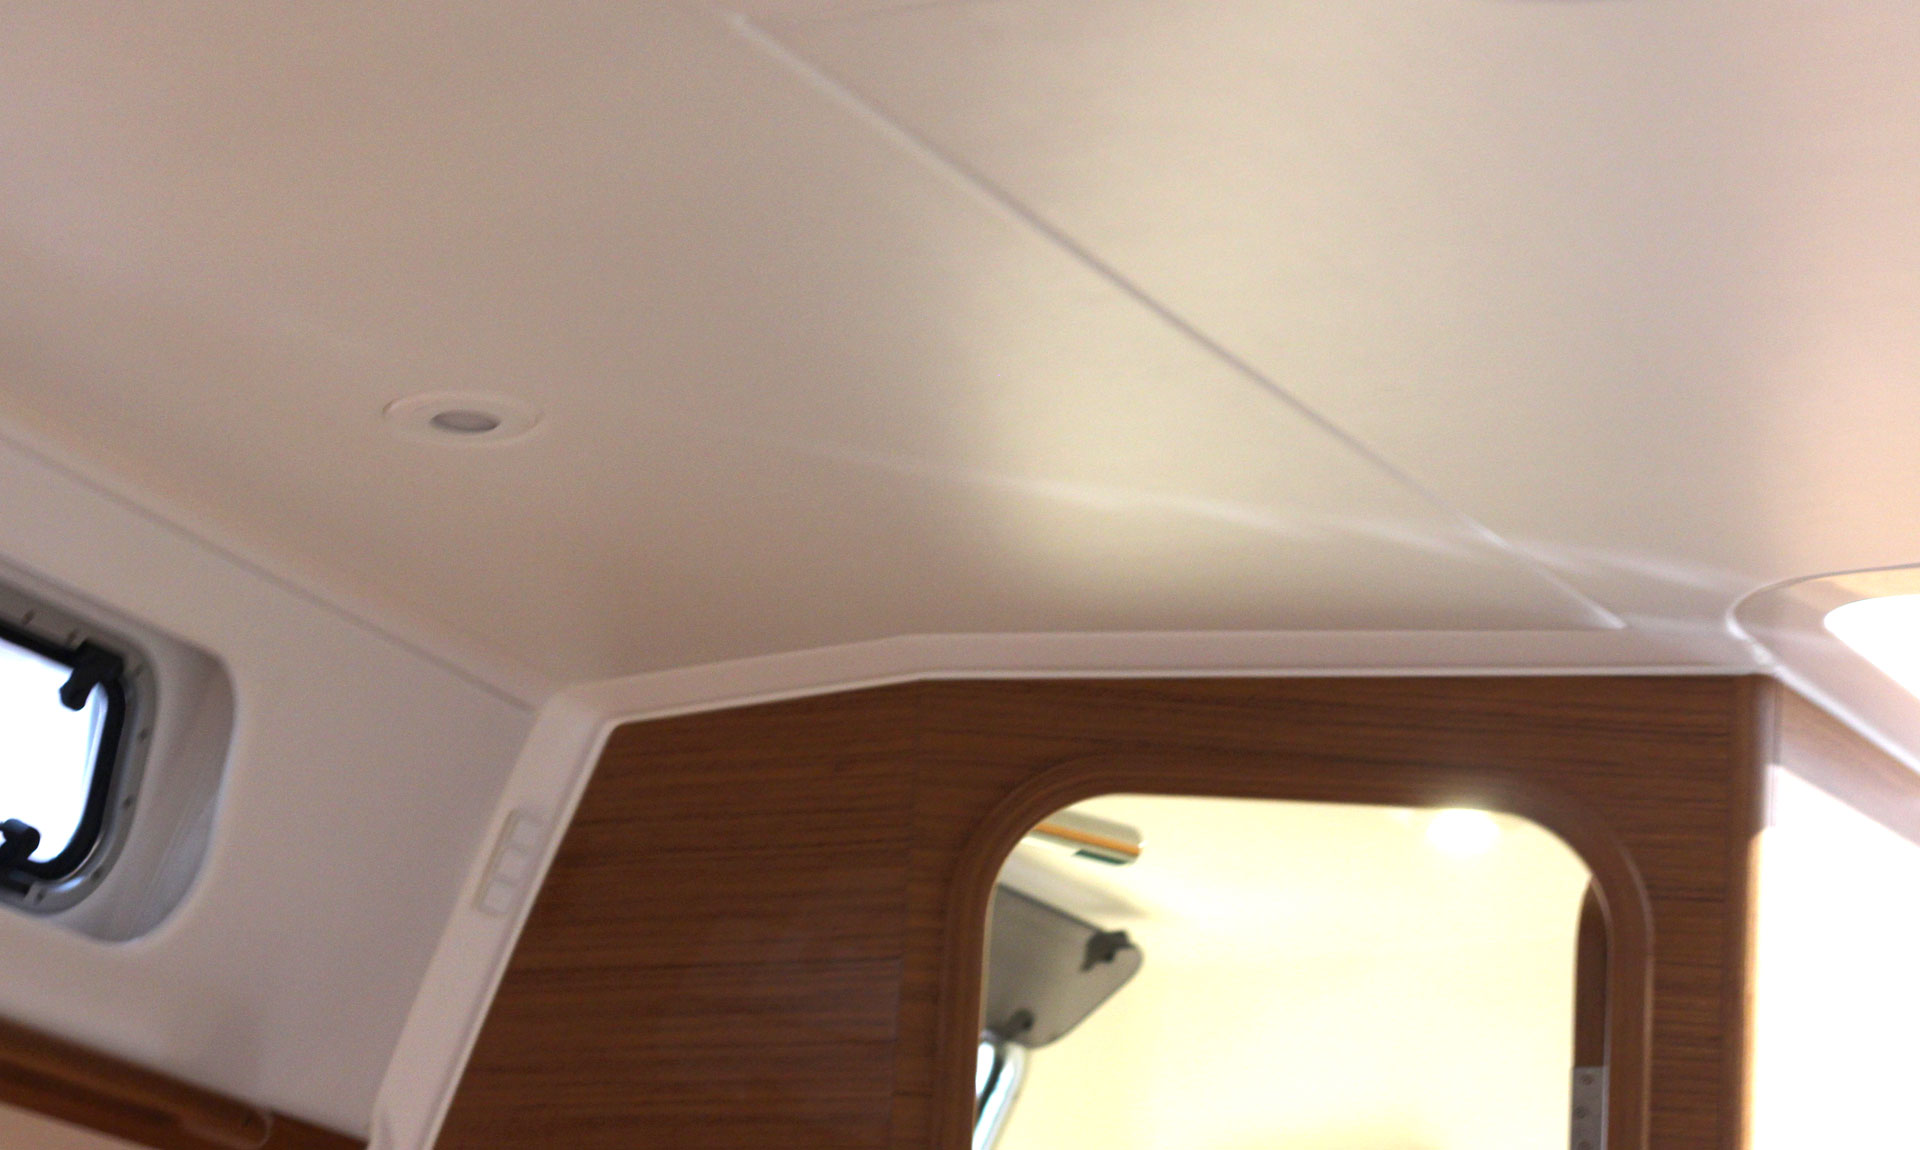 Ceiling panels made with leaether coating. I´ll keep that idea for my own boat.